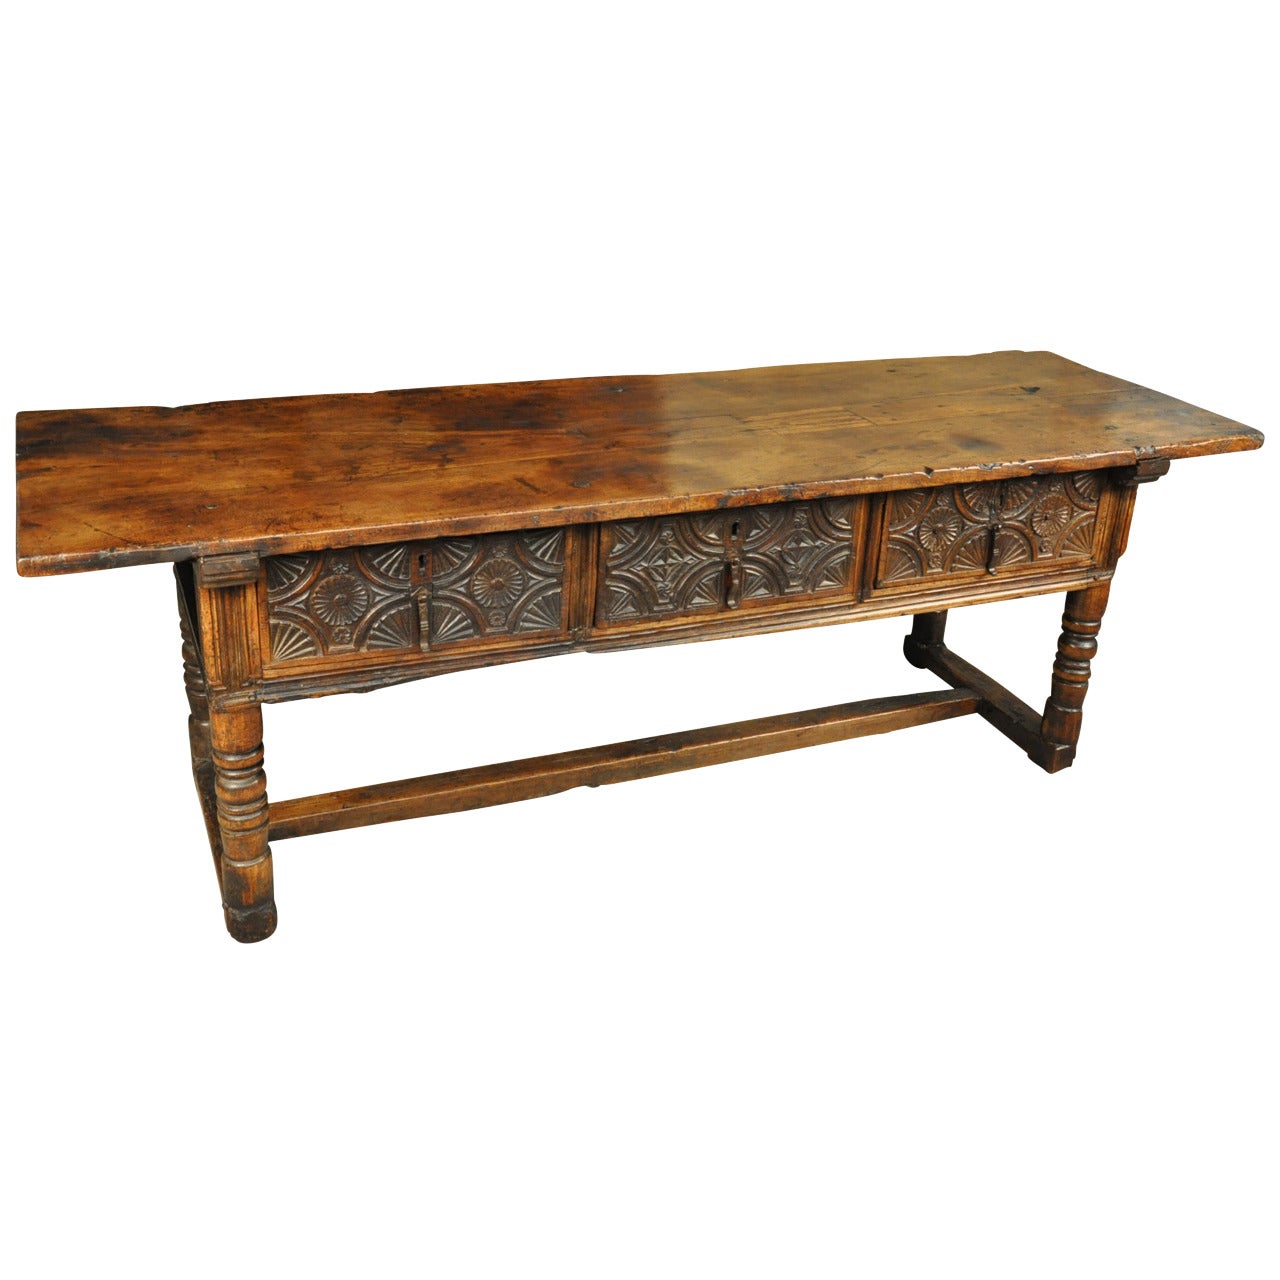 Spanish 17th Century Console Table in Chestnut